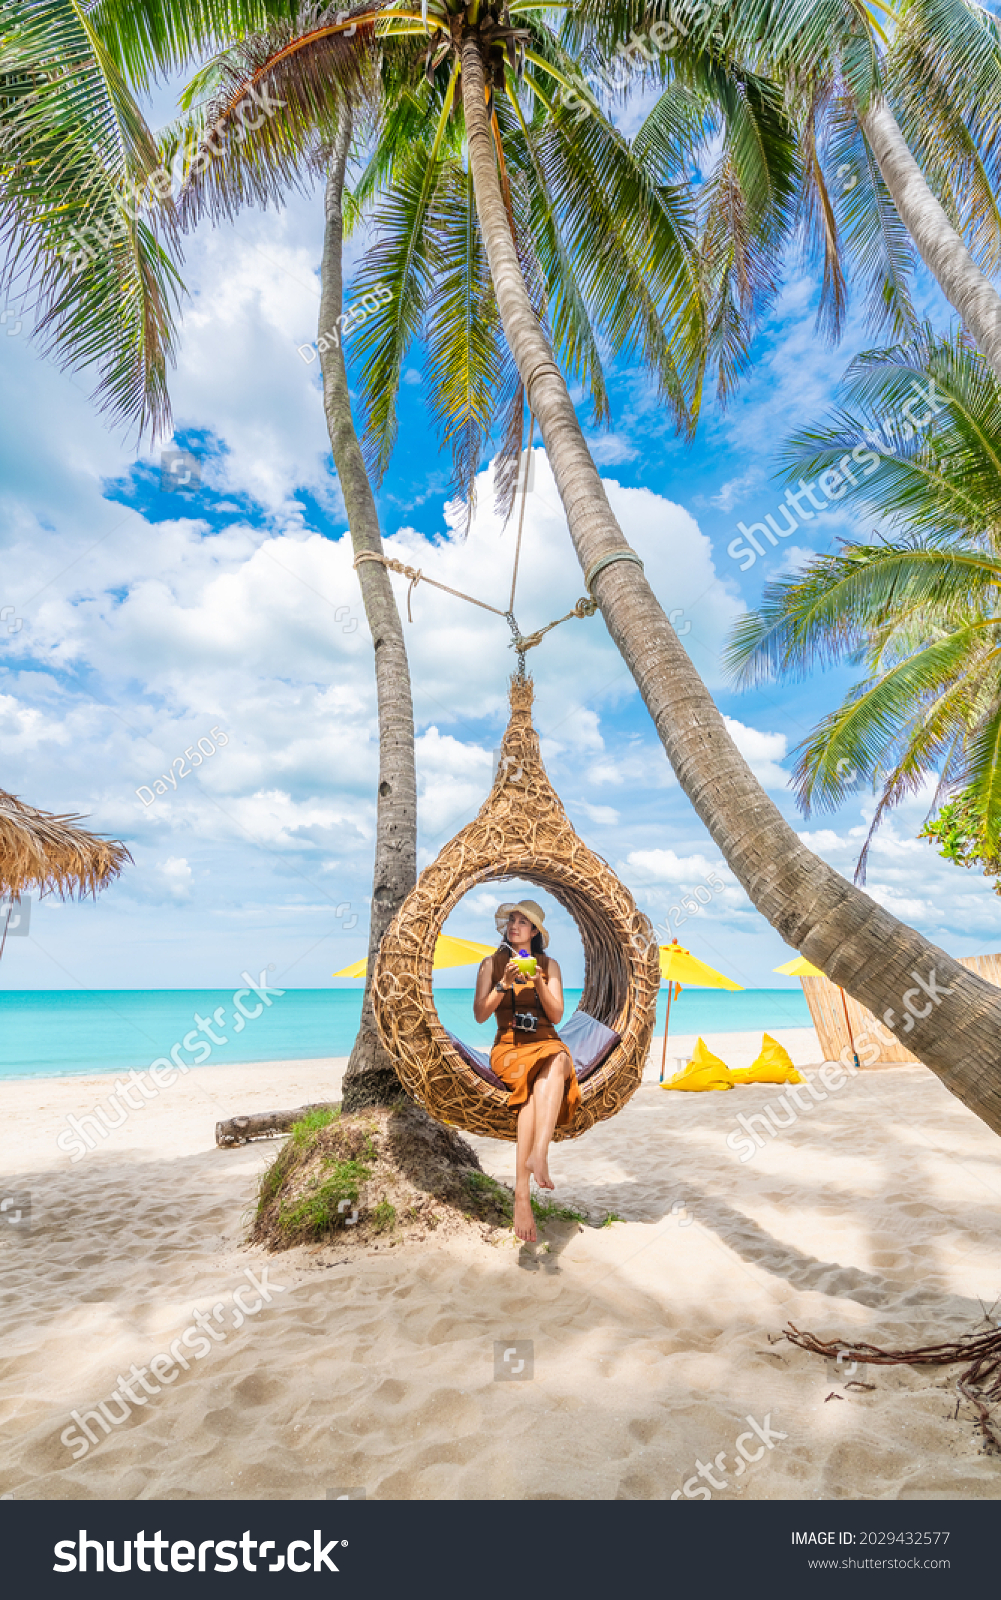 Summer lifestyle traveler woman relaxing on straw nests joy nature view landscape vacation luxury beach, Attraction place leisure tourist travel Thailand holiday, Tourism beautiful destination Asia #2029432577